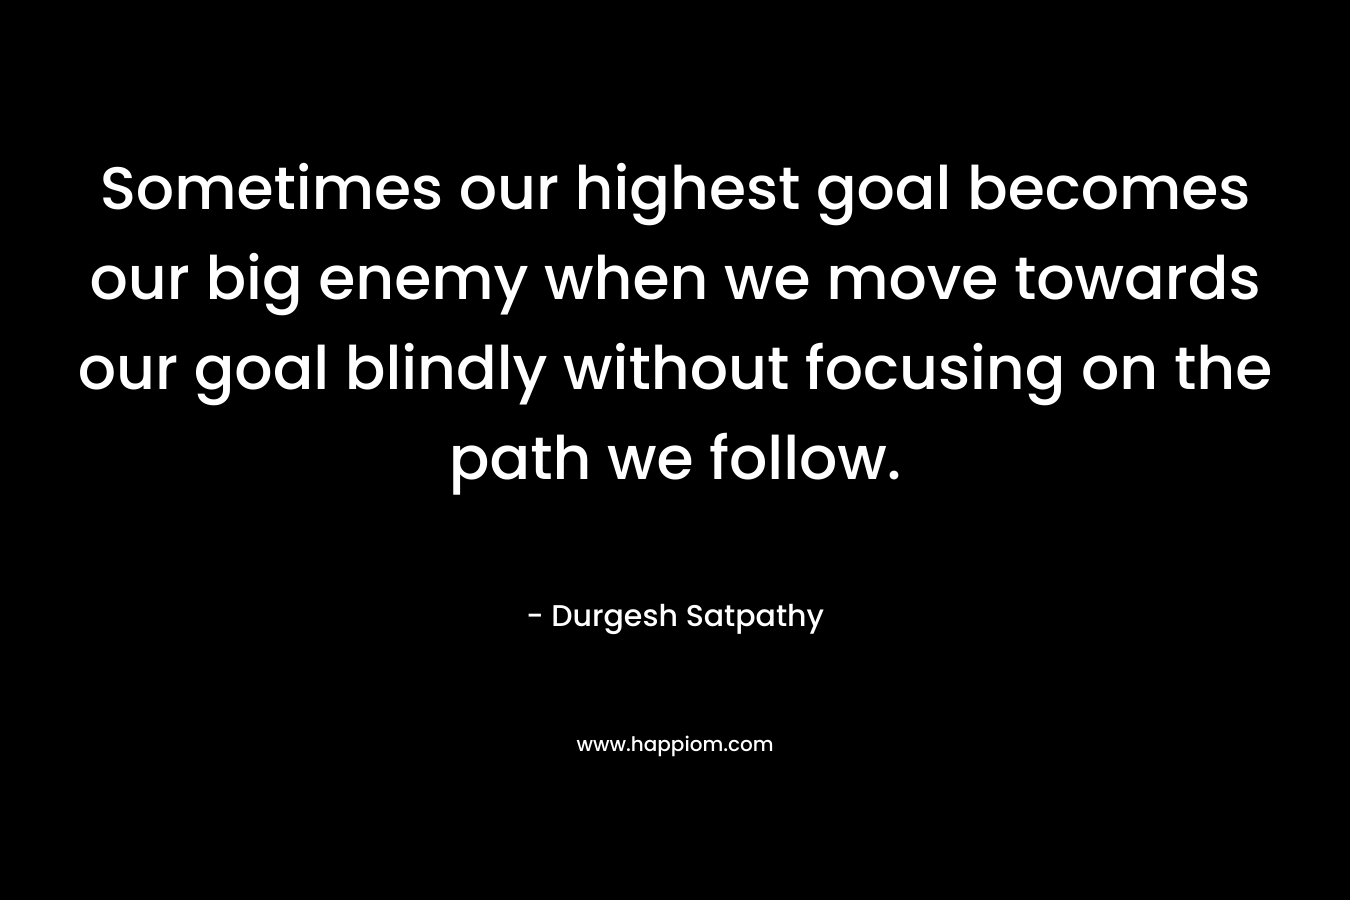 Sometimes our highest goal becomes our big enemy when we move towards our goal blindly without focusing on the path we follow. – Durgesh Satpathy